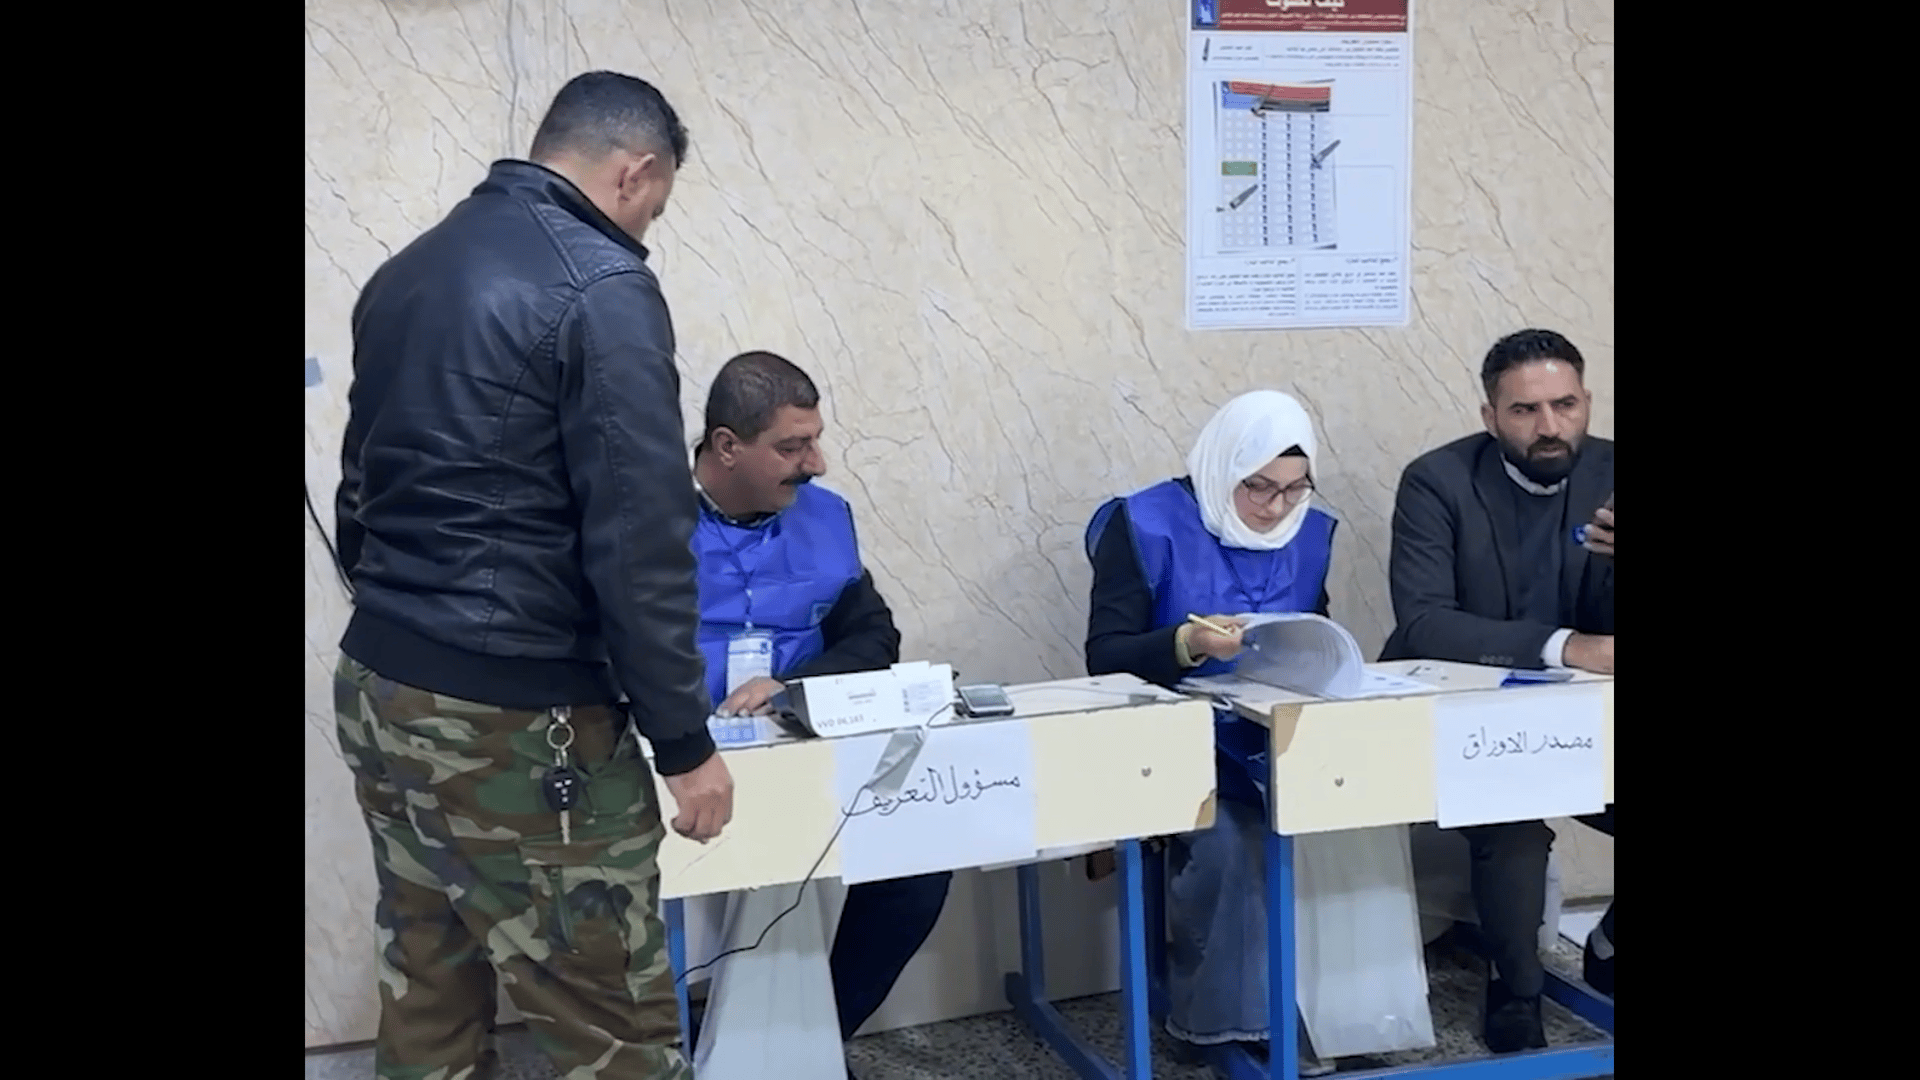 Smooth voting process in Nineveh province